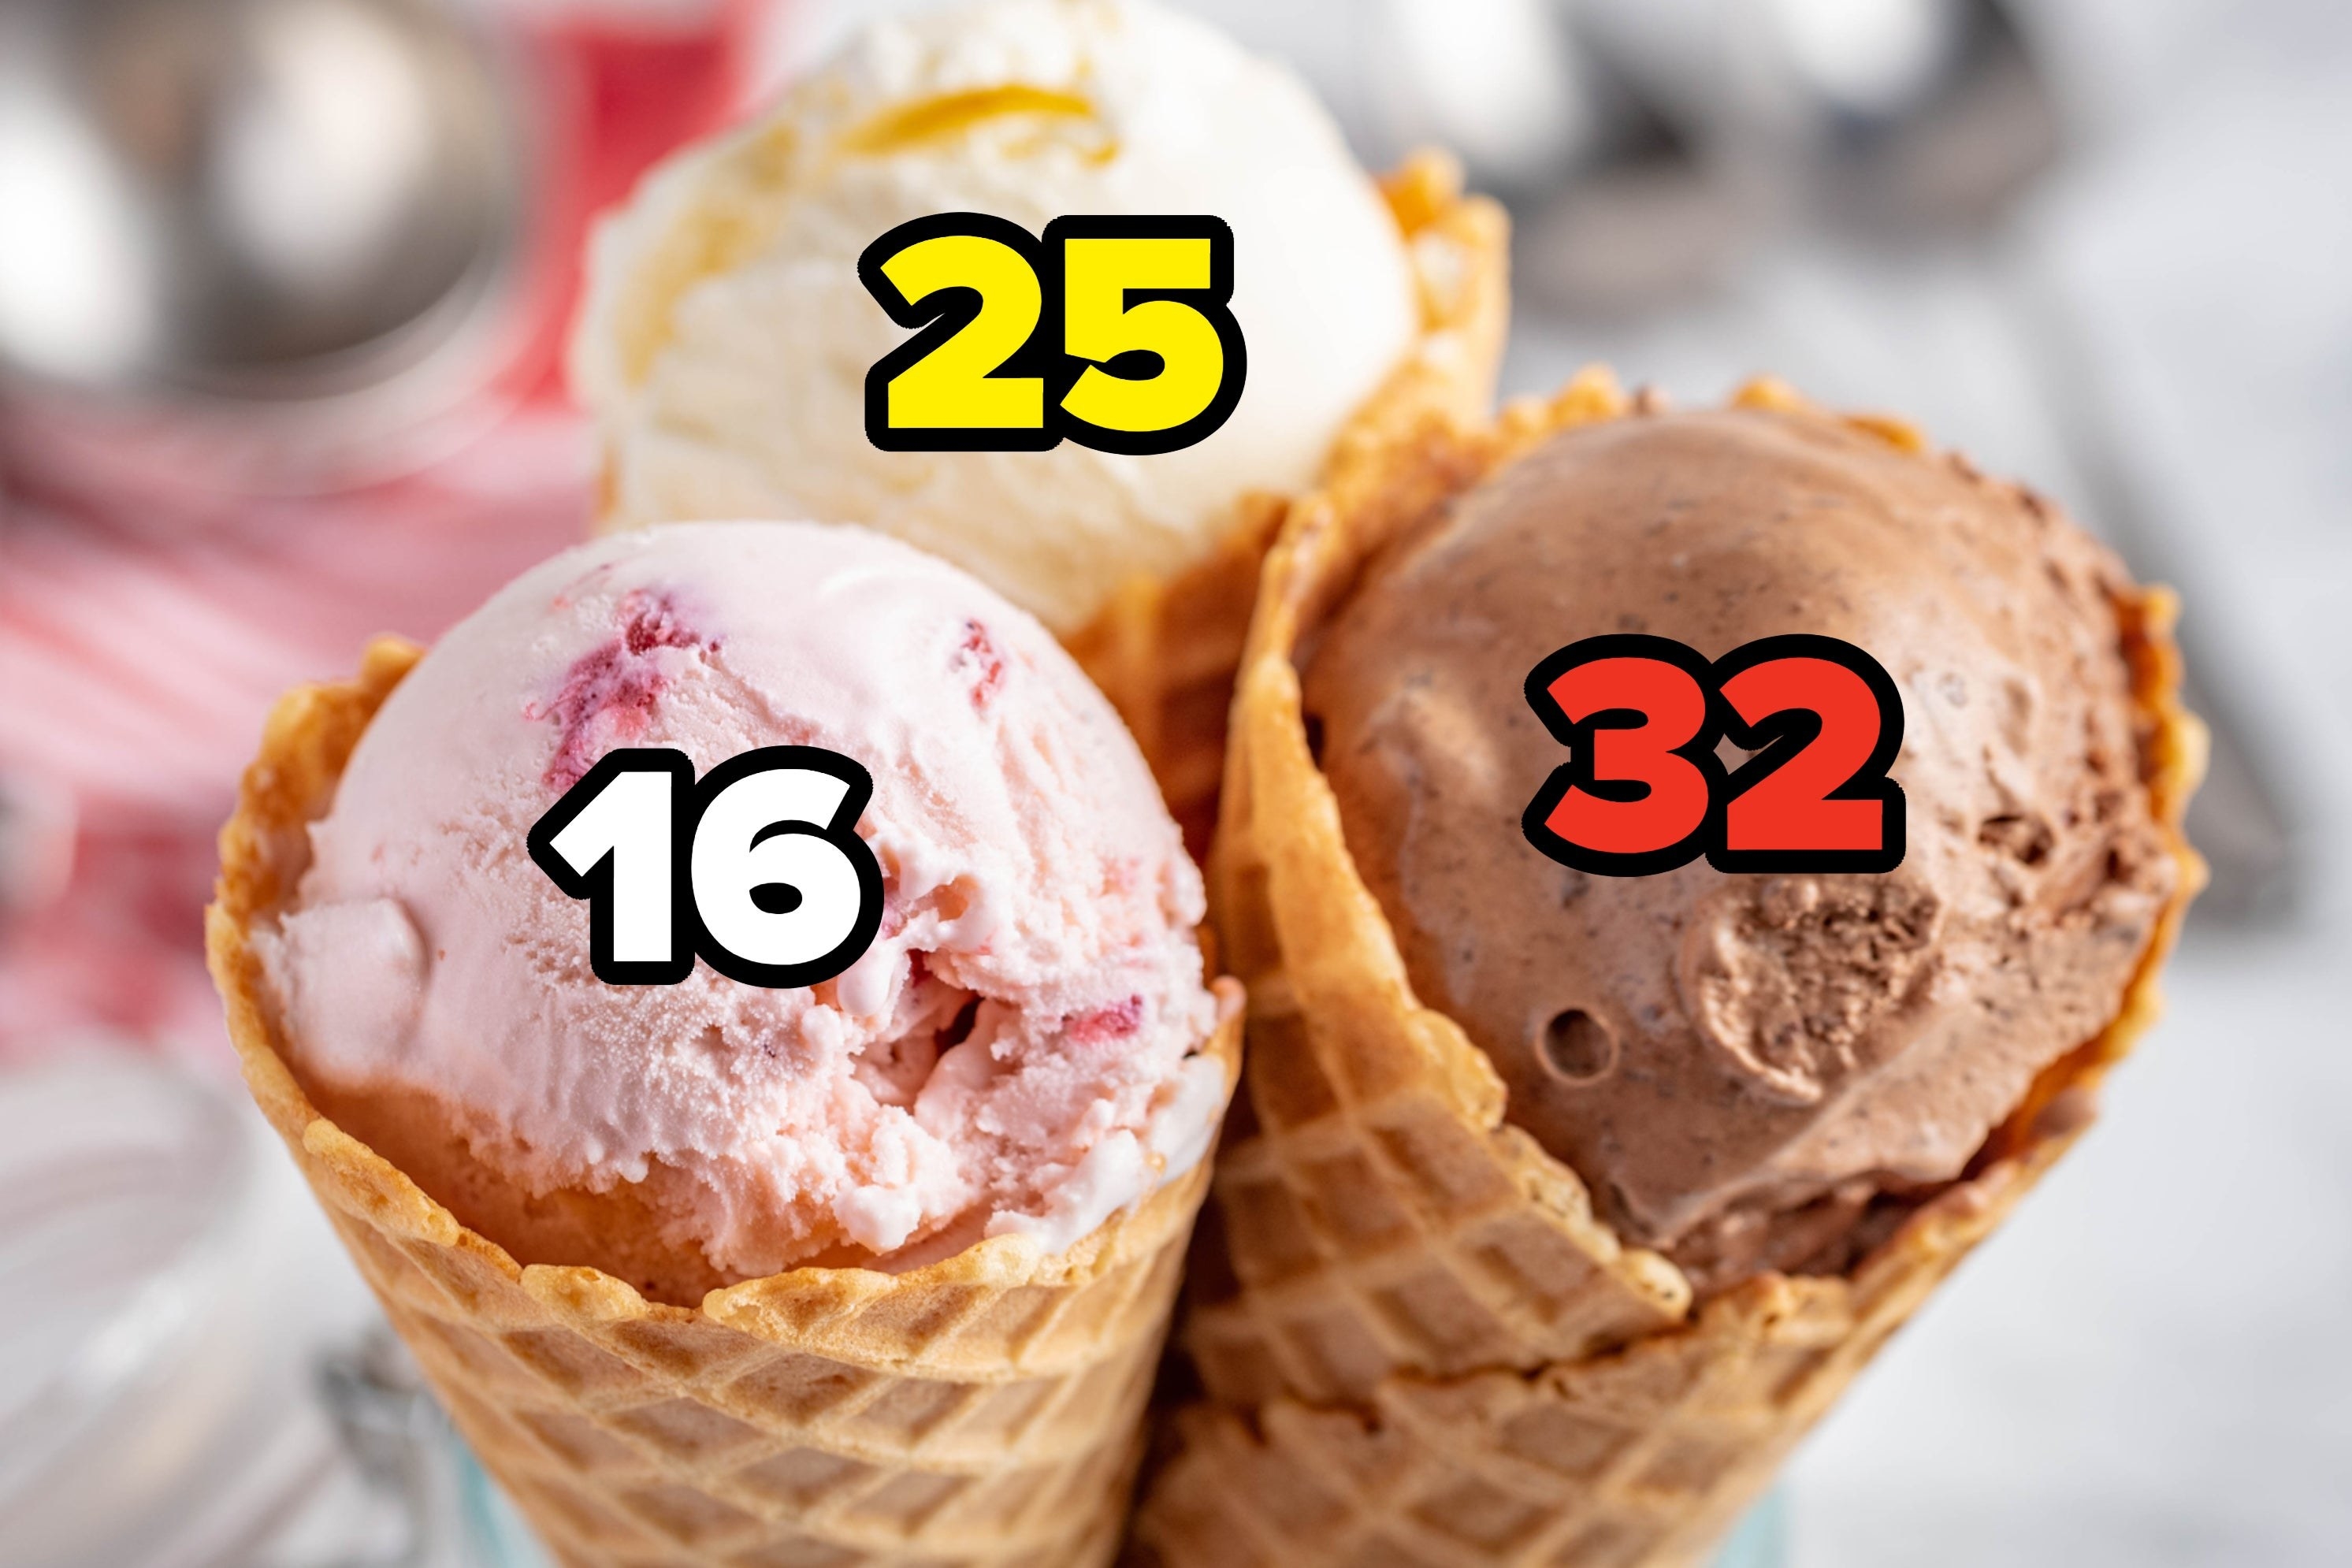 Strawberry ice cream with the number &quot;16,&quot; Vanilla ice cream with the number &quot;25,&quot; and chocolate ice cream with the number &quot;32.&quot;